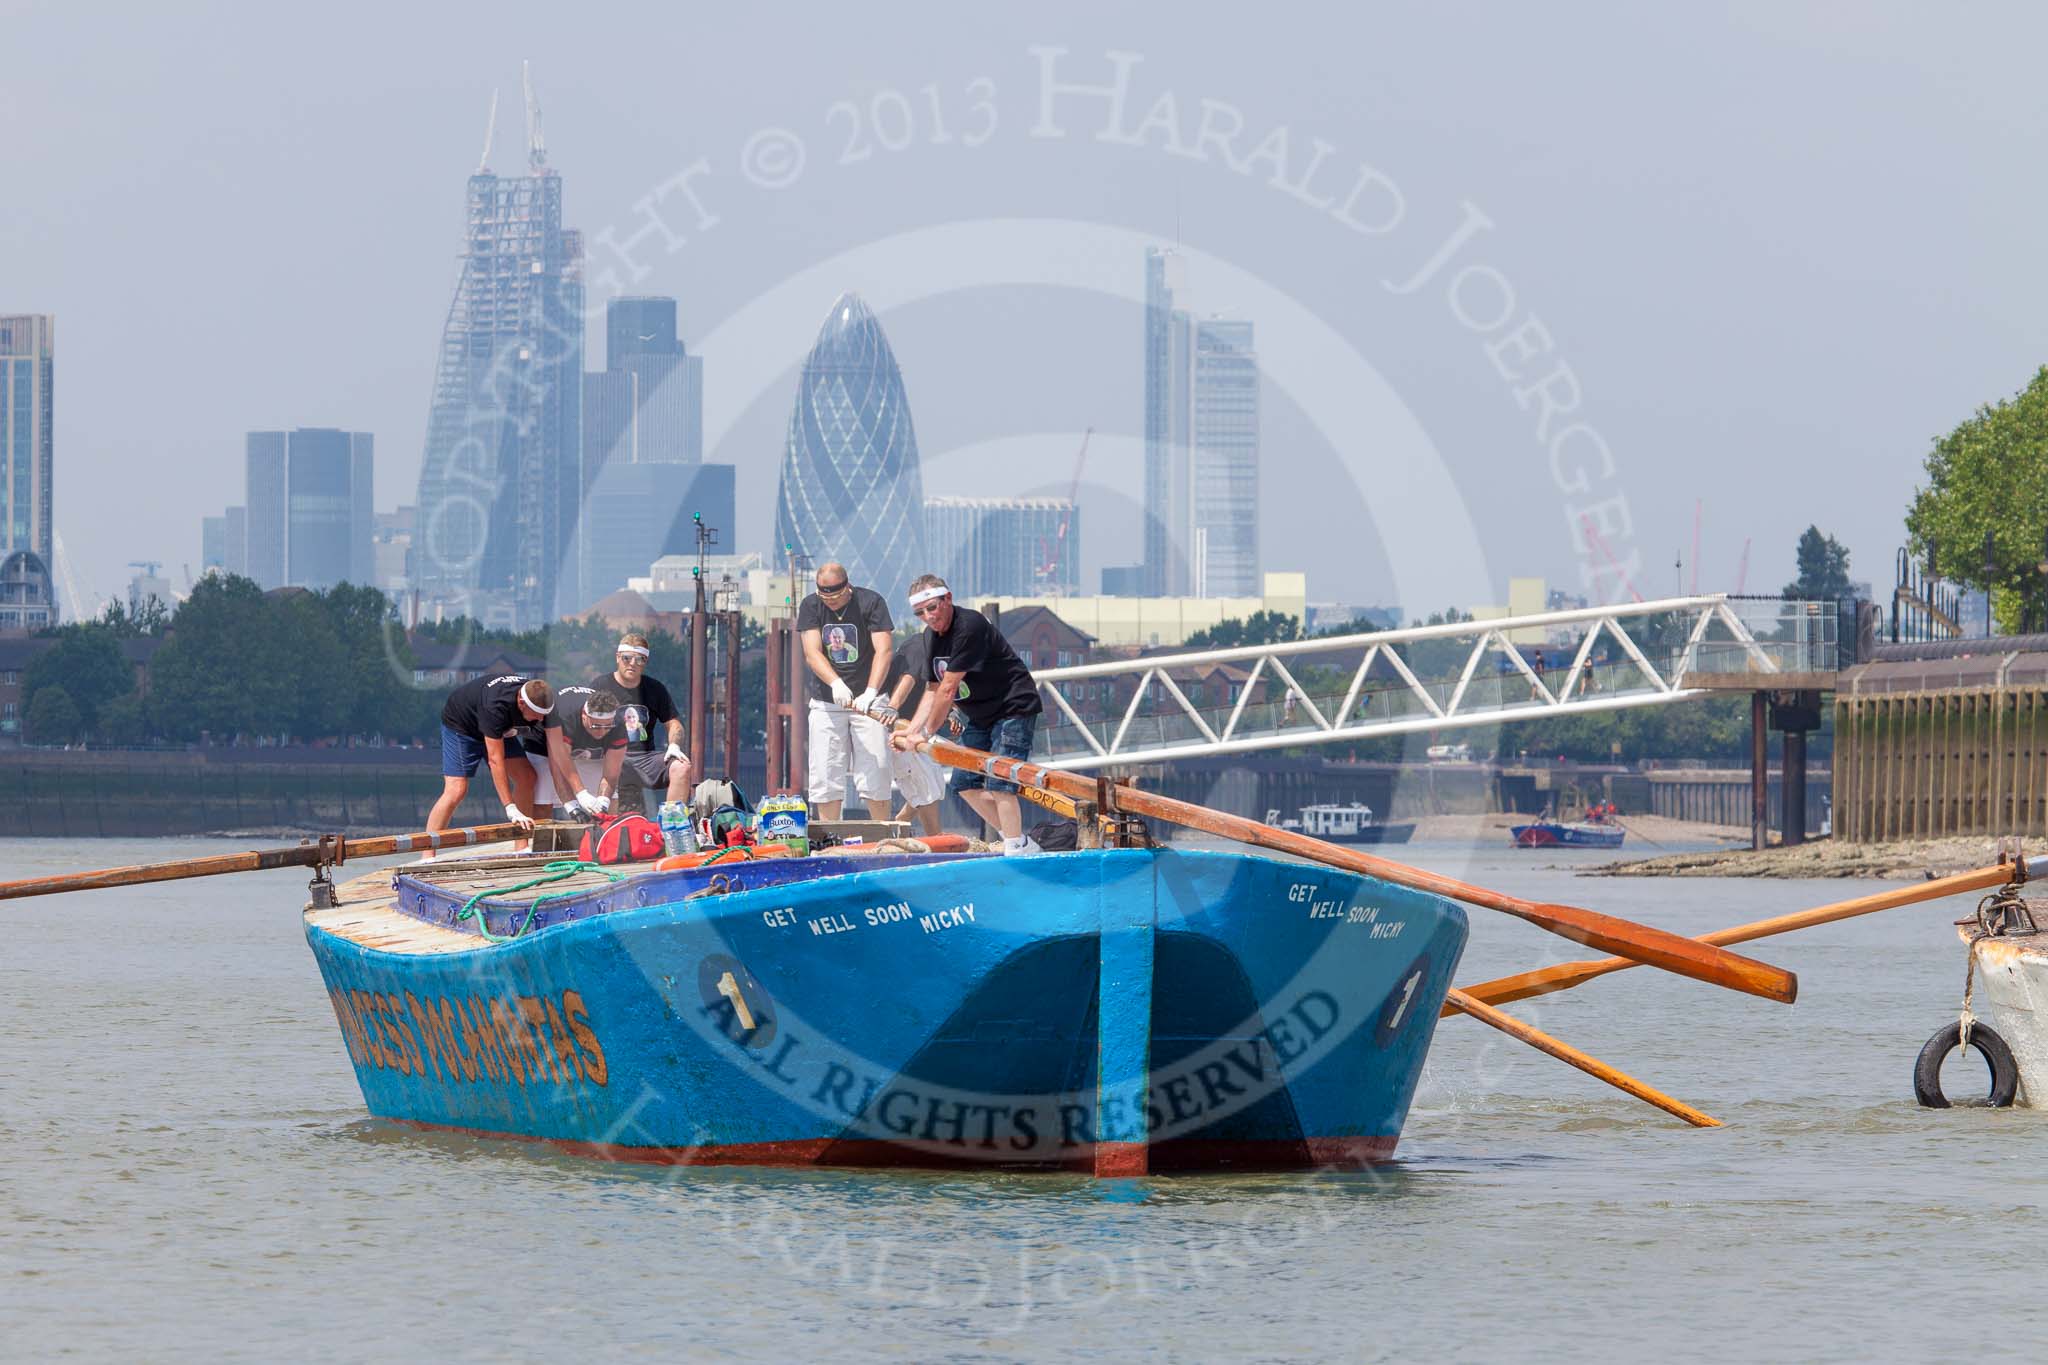 TOW River Thames Barge Driving Race 2013: Rear view of barge "Darren Lacey", by Princess Pocahontas, during the race, approaching Masthouse Terrace Pier. In the background the skyscrapers of the City of London, including the "Gherkin". On the right of "Darren Lacey" is barge "Spirit of Mountabatten", by Mechanical Movements and Enabling Services Ltd..
River Thames between Greenwich and Westminster,
London,

United Kingdom,
on 13 July 2013 at 12:41, image #176